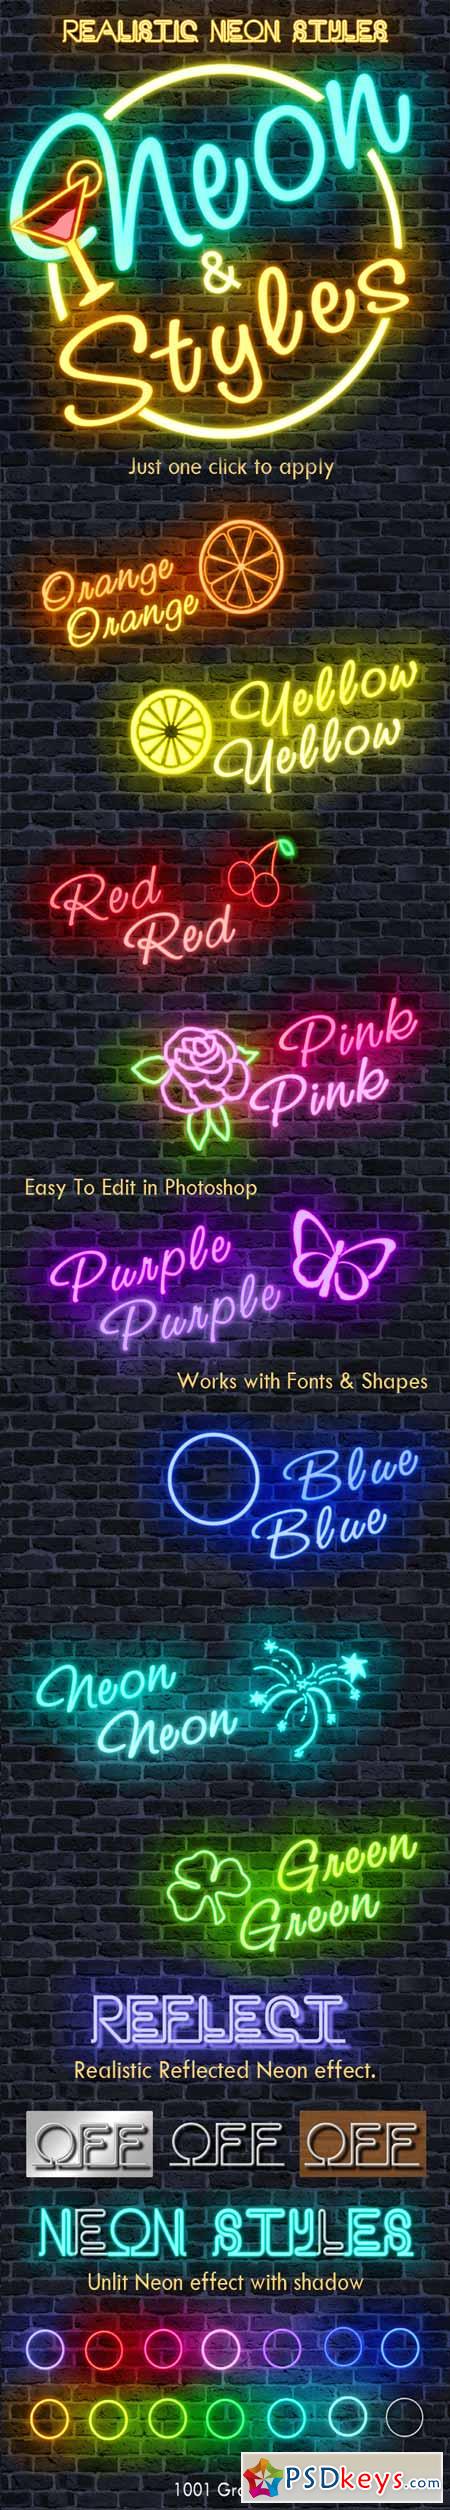 50 Realistic Neon Text Styles 14350746